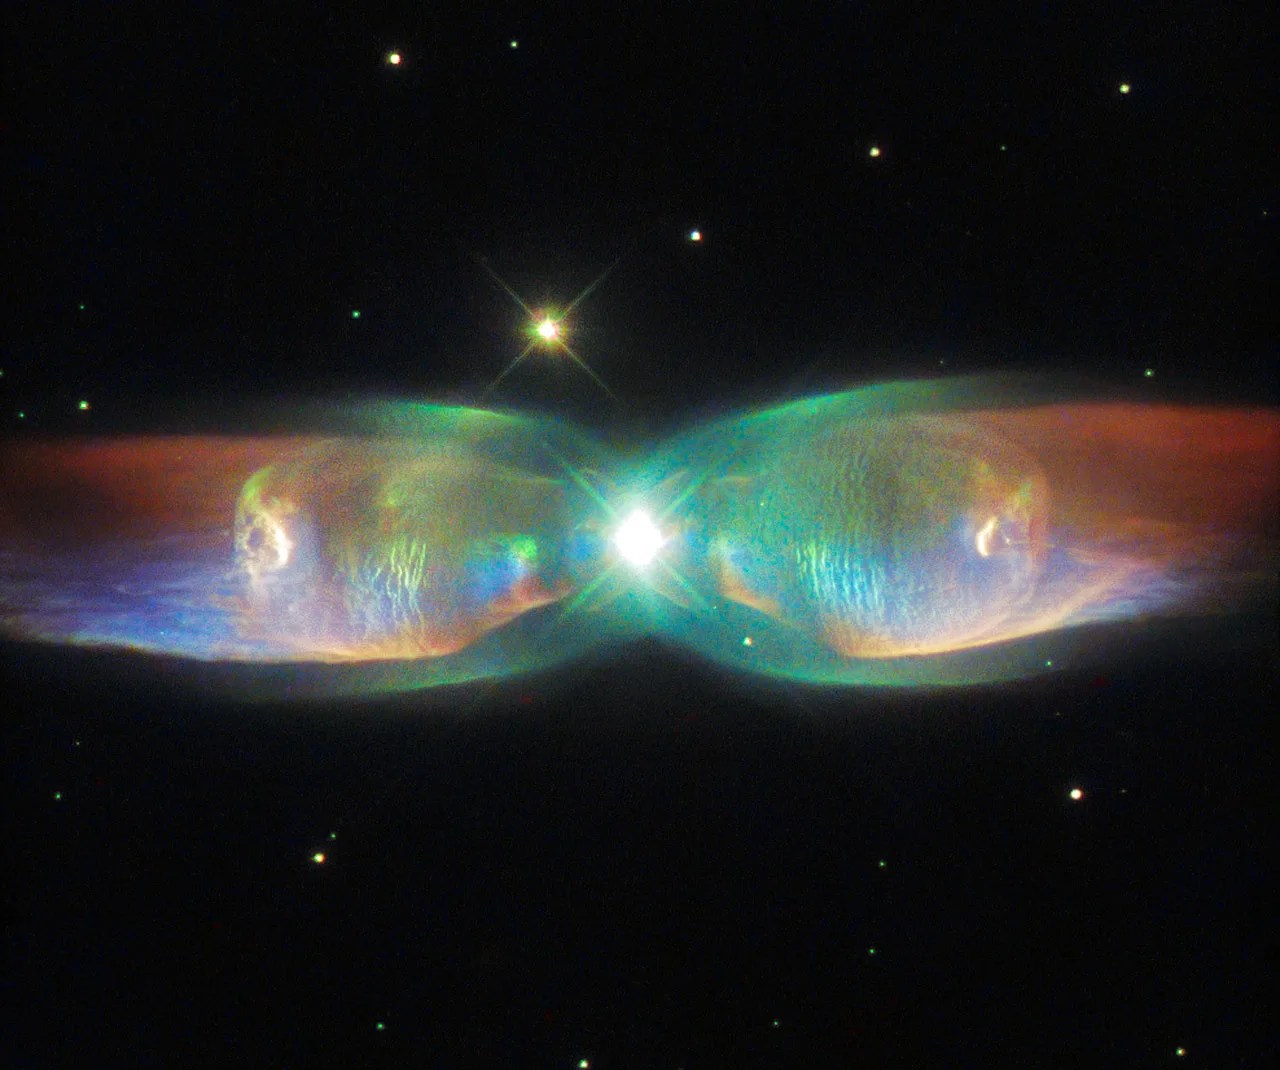 The shimmering colors visible in this NASA/ESA Hubble Space Telescope image show off the complexity of the Twin Jet Nebula.